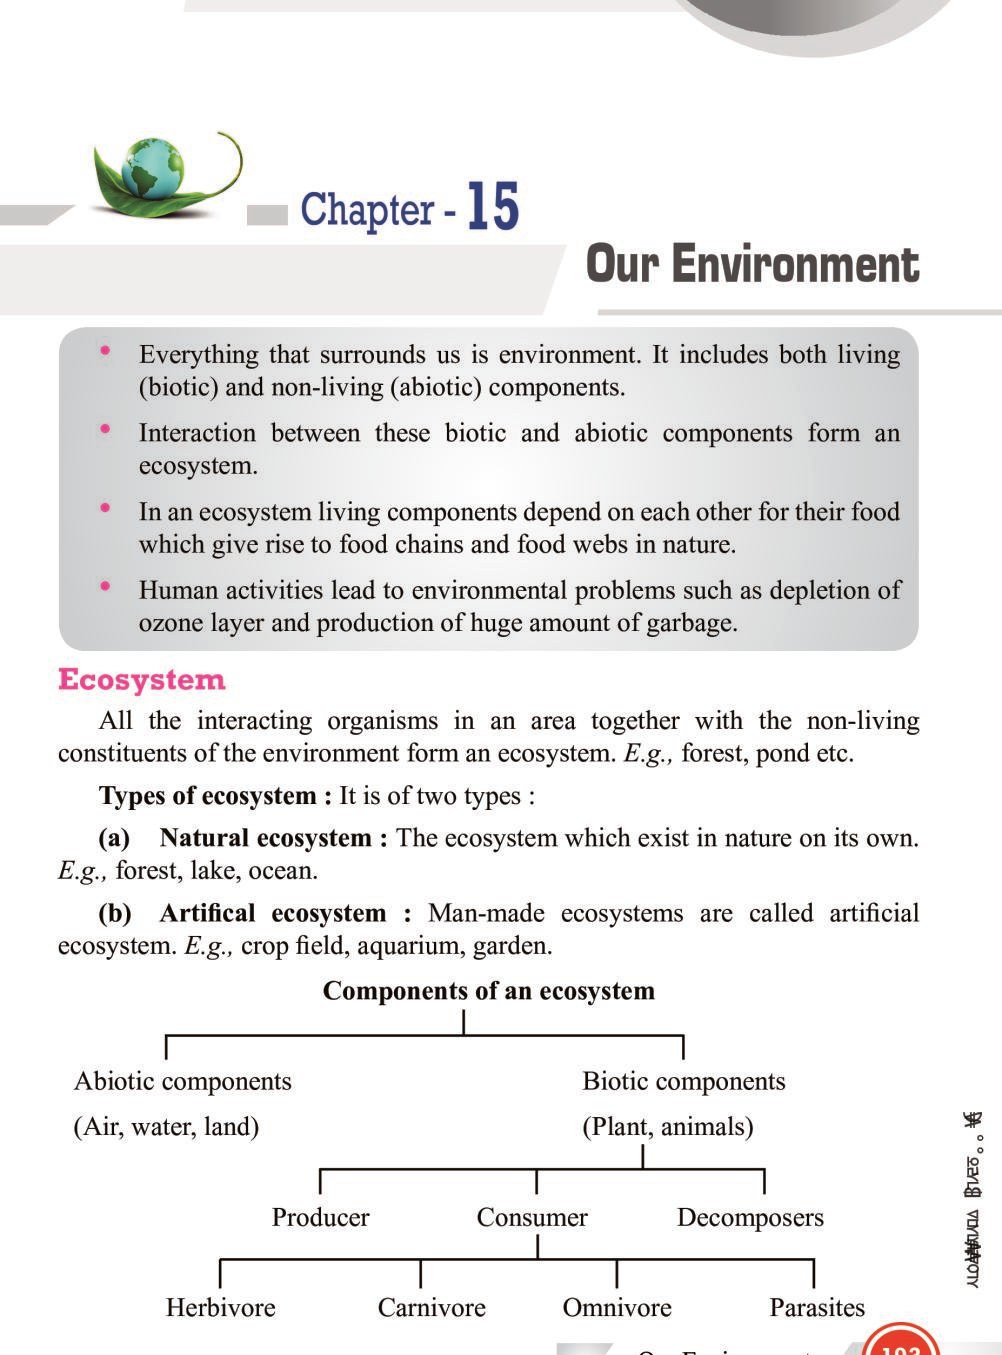 case study based question our environment class 10